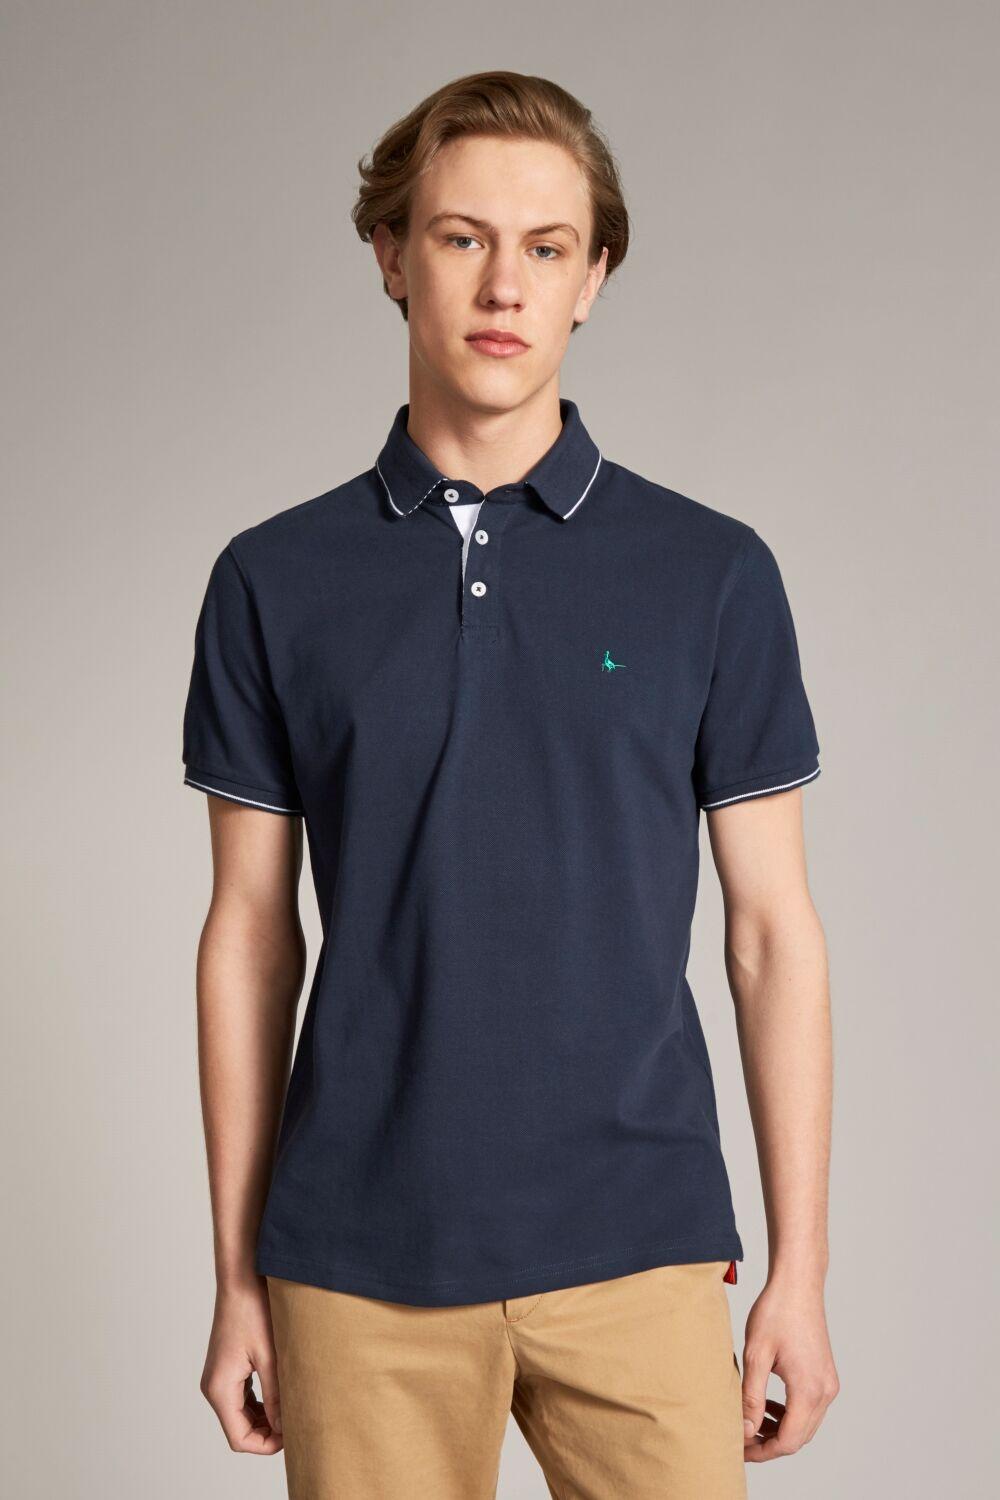 Jack Wills Hedgeton Sports Polo in Blue for Men - Lyst